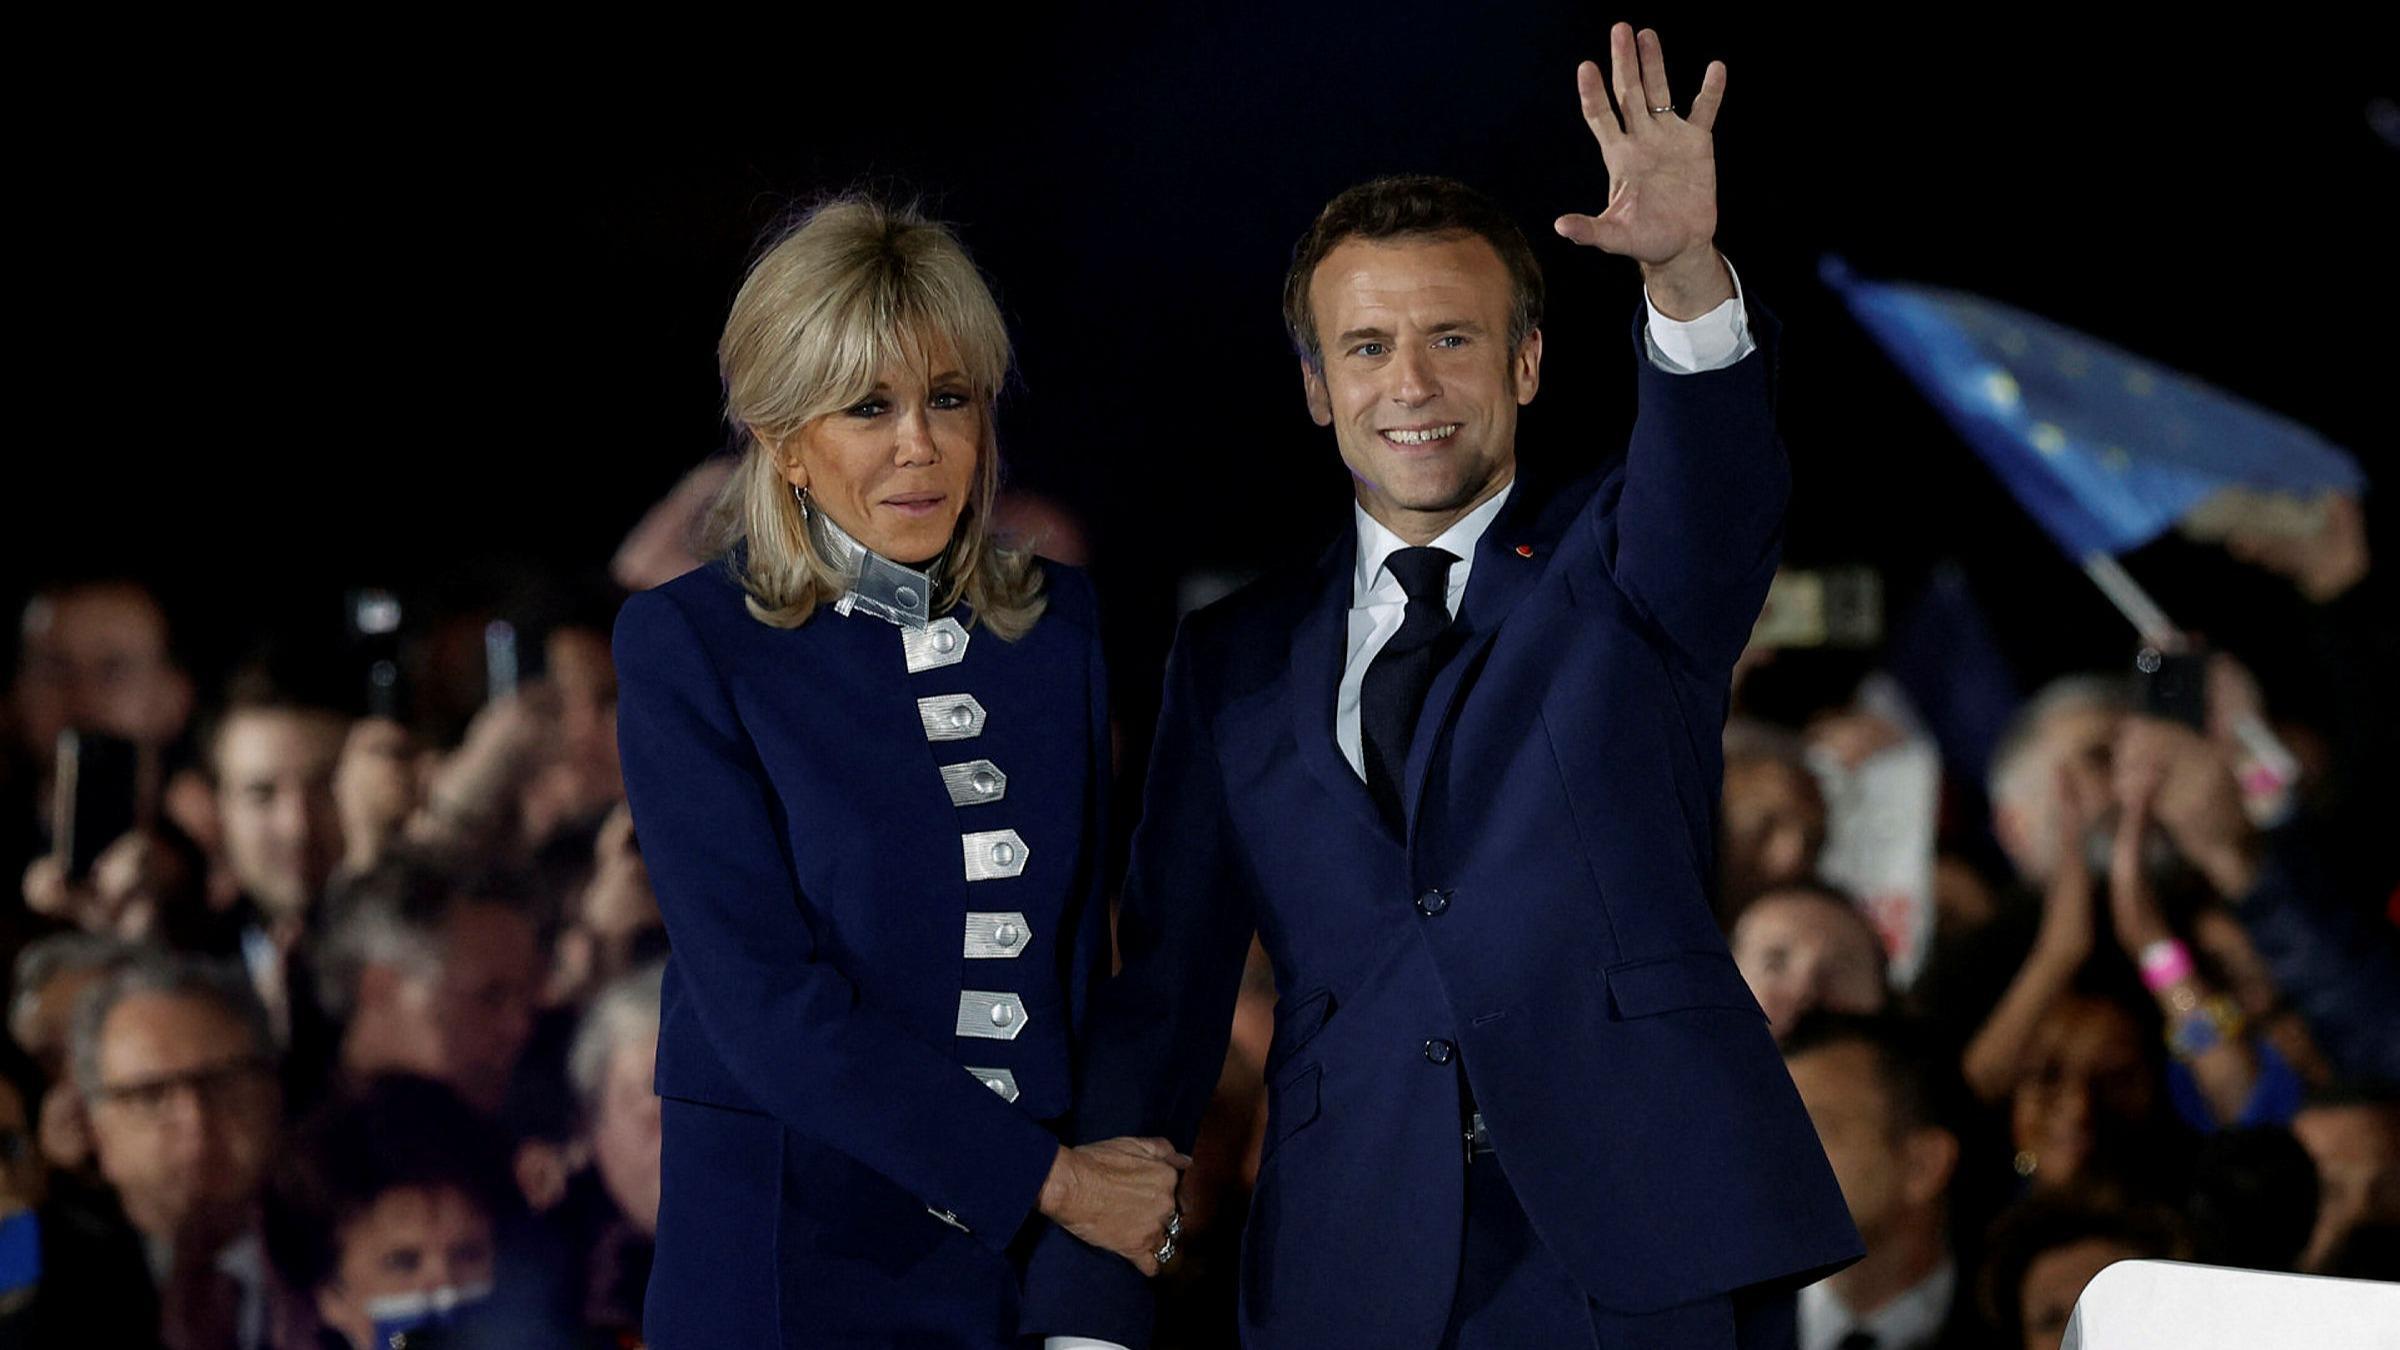 Emmanuel Macron is elected as French President for another term